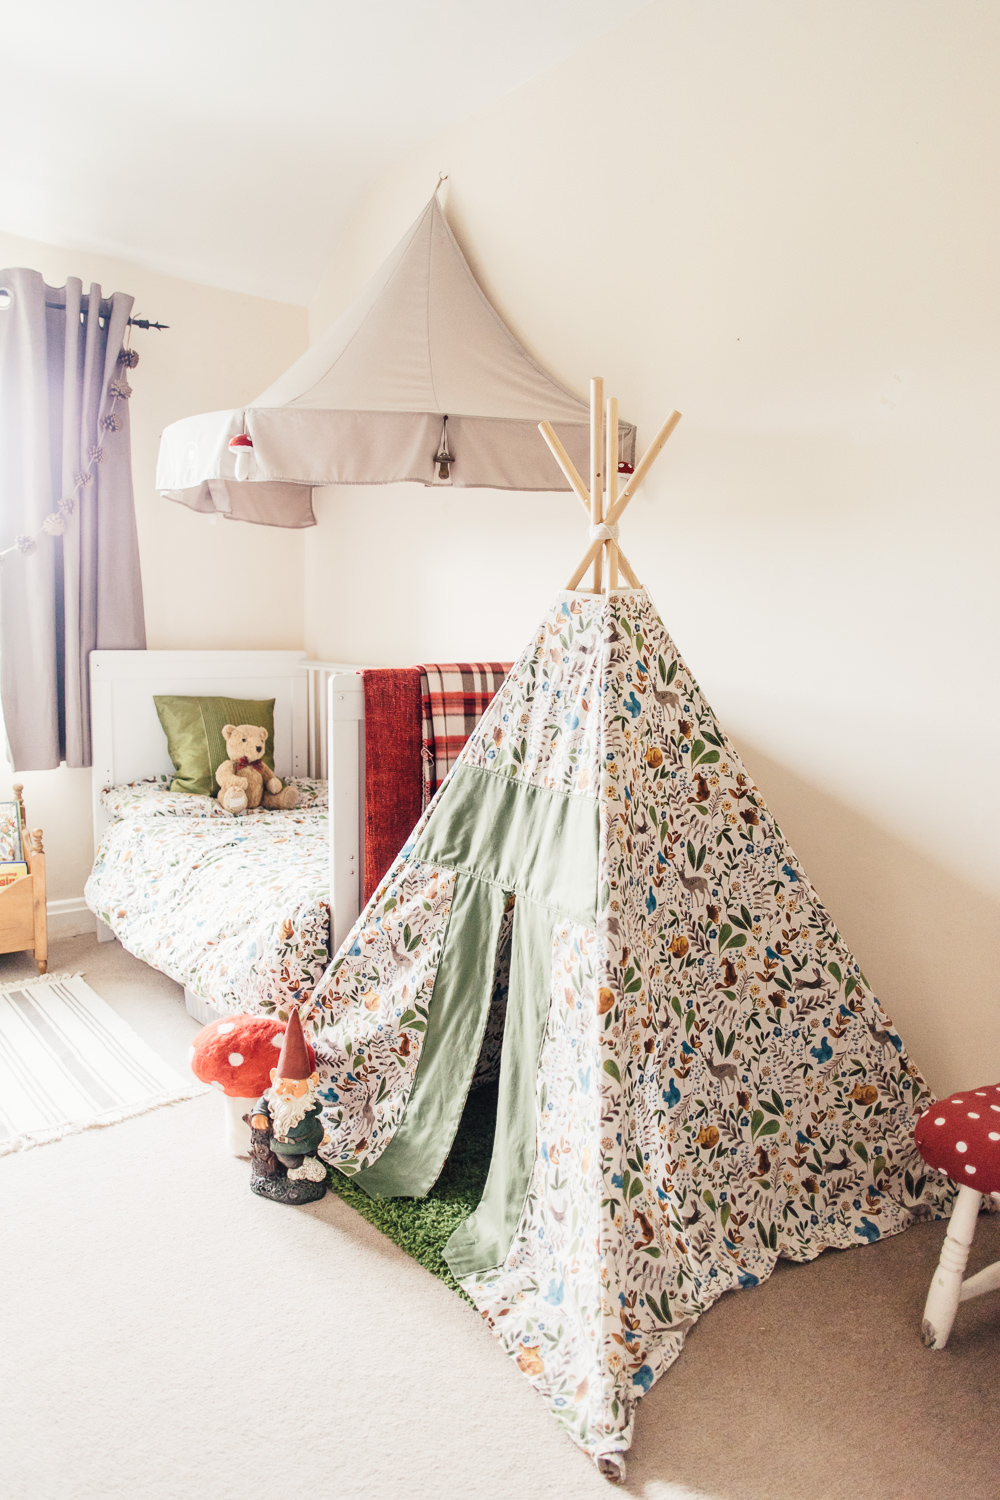 Tipi | Homemade decor | Homemade tipi from a duvet cover in a woodland inspired bedroom in a rented property with homemade decor and details.